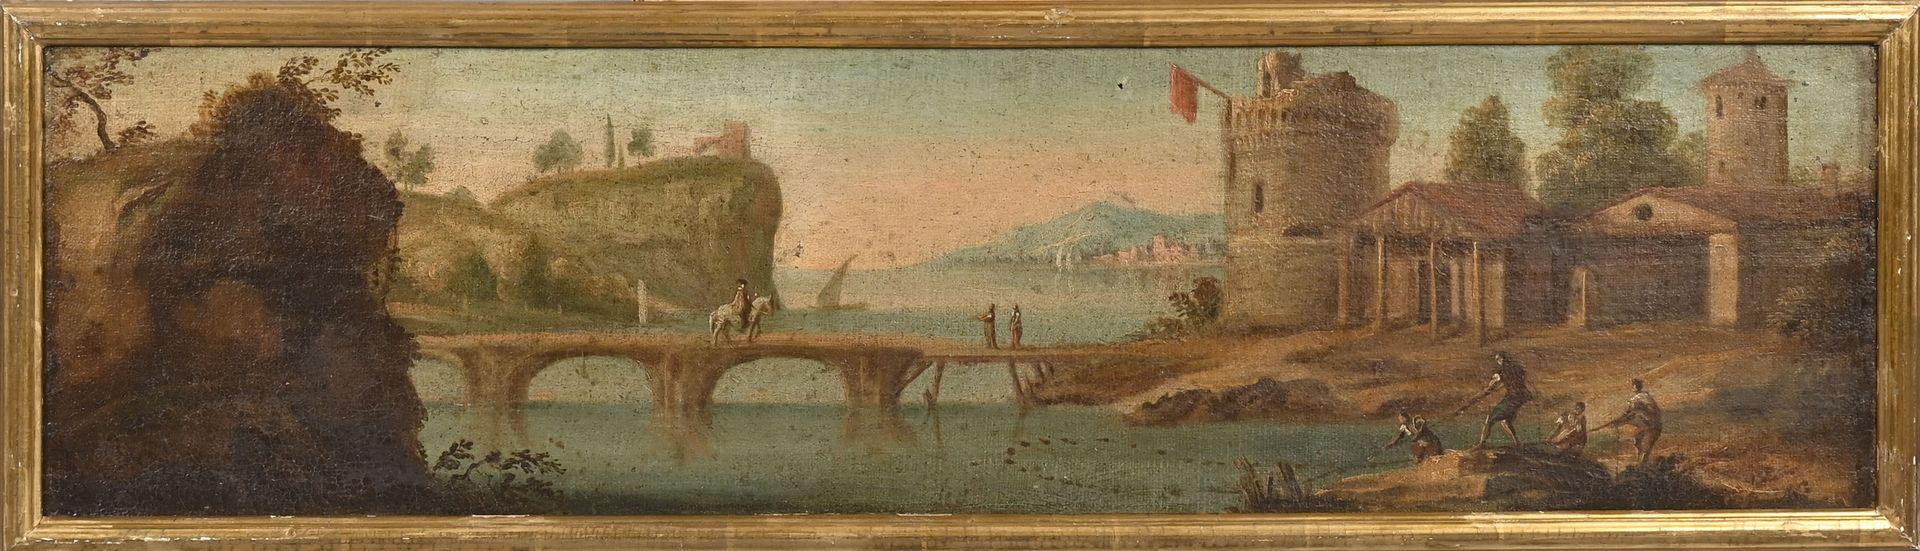 Null French school of the end of the 18th century
Riders crossing a bridge
Canva&hellip;